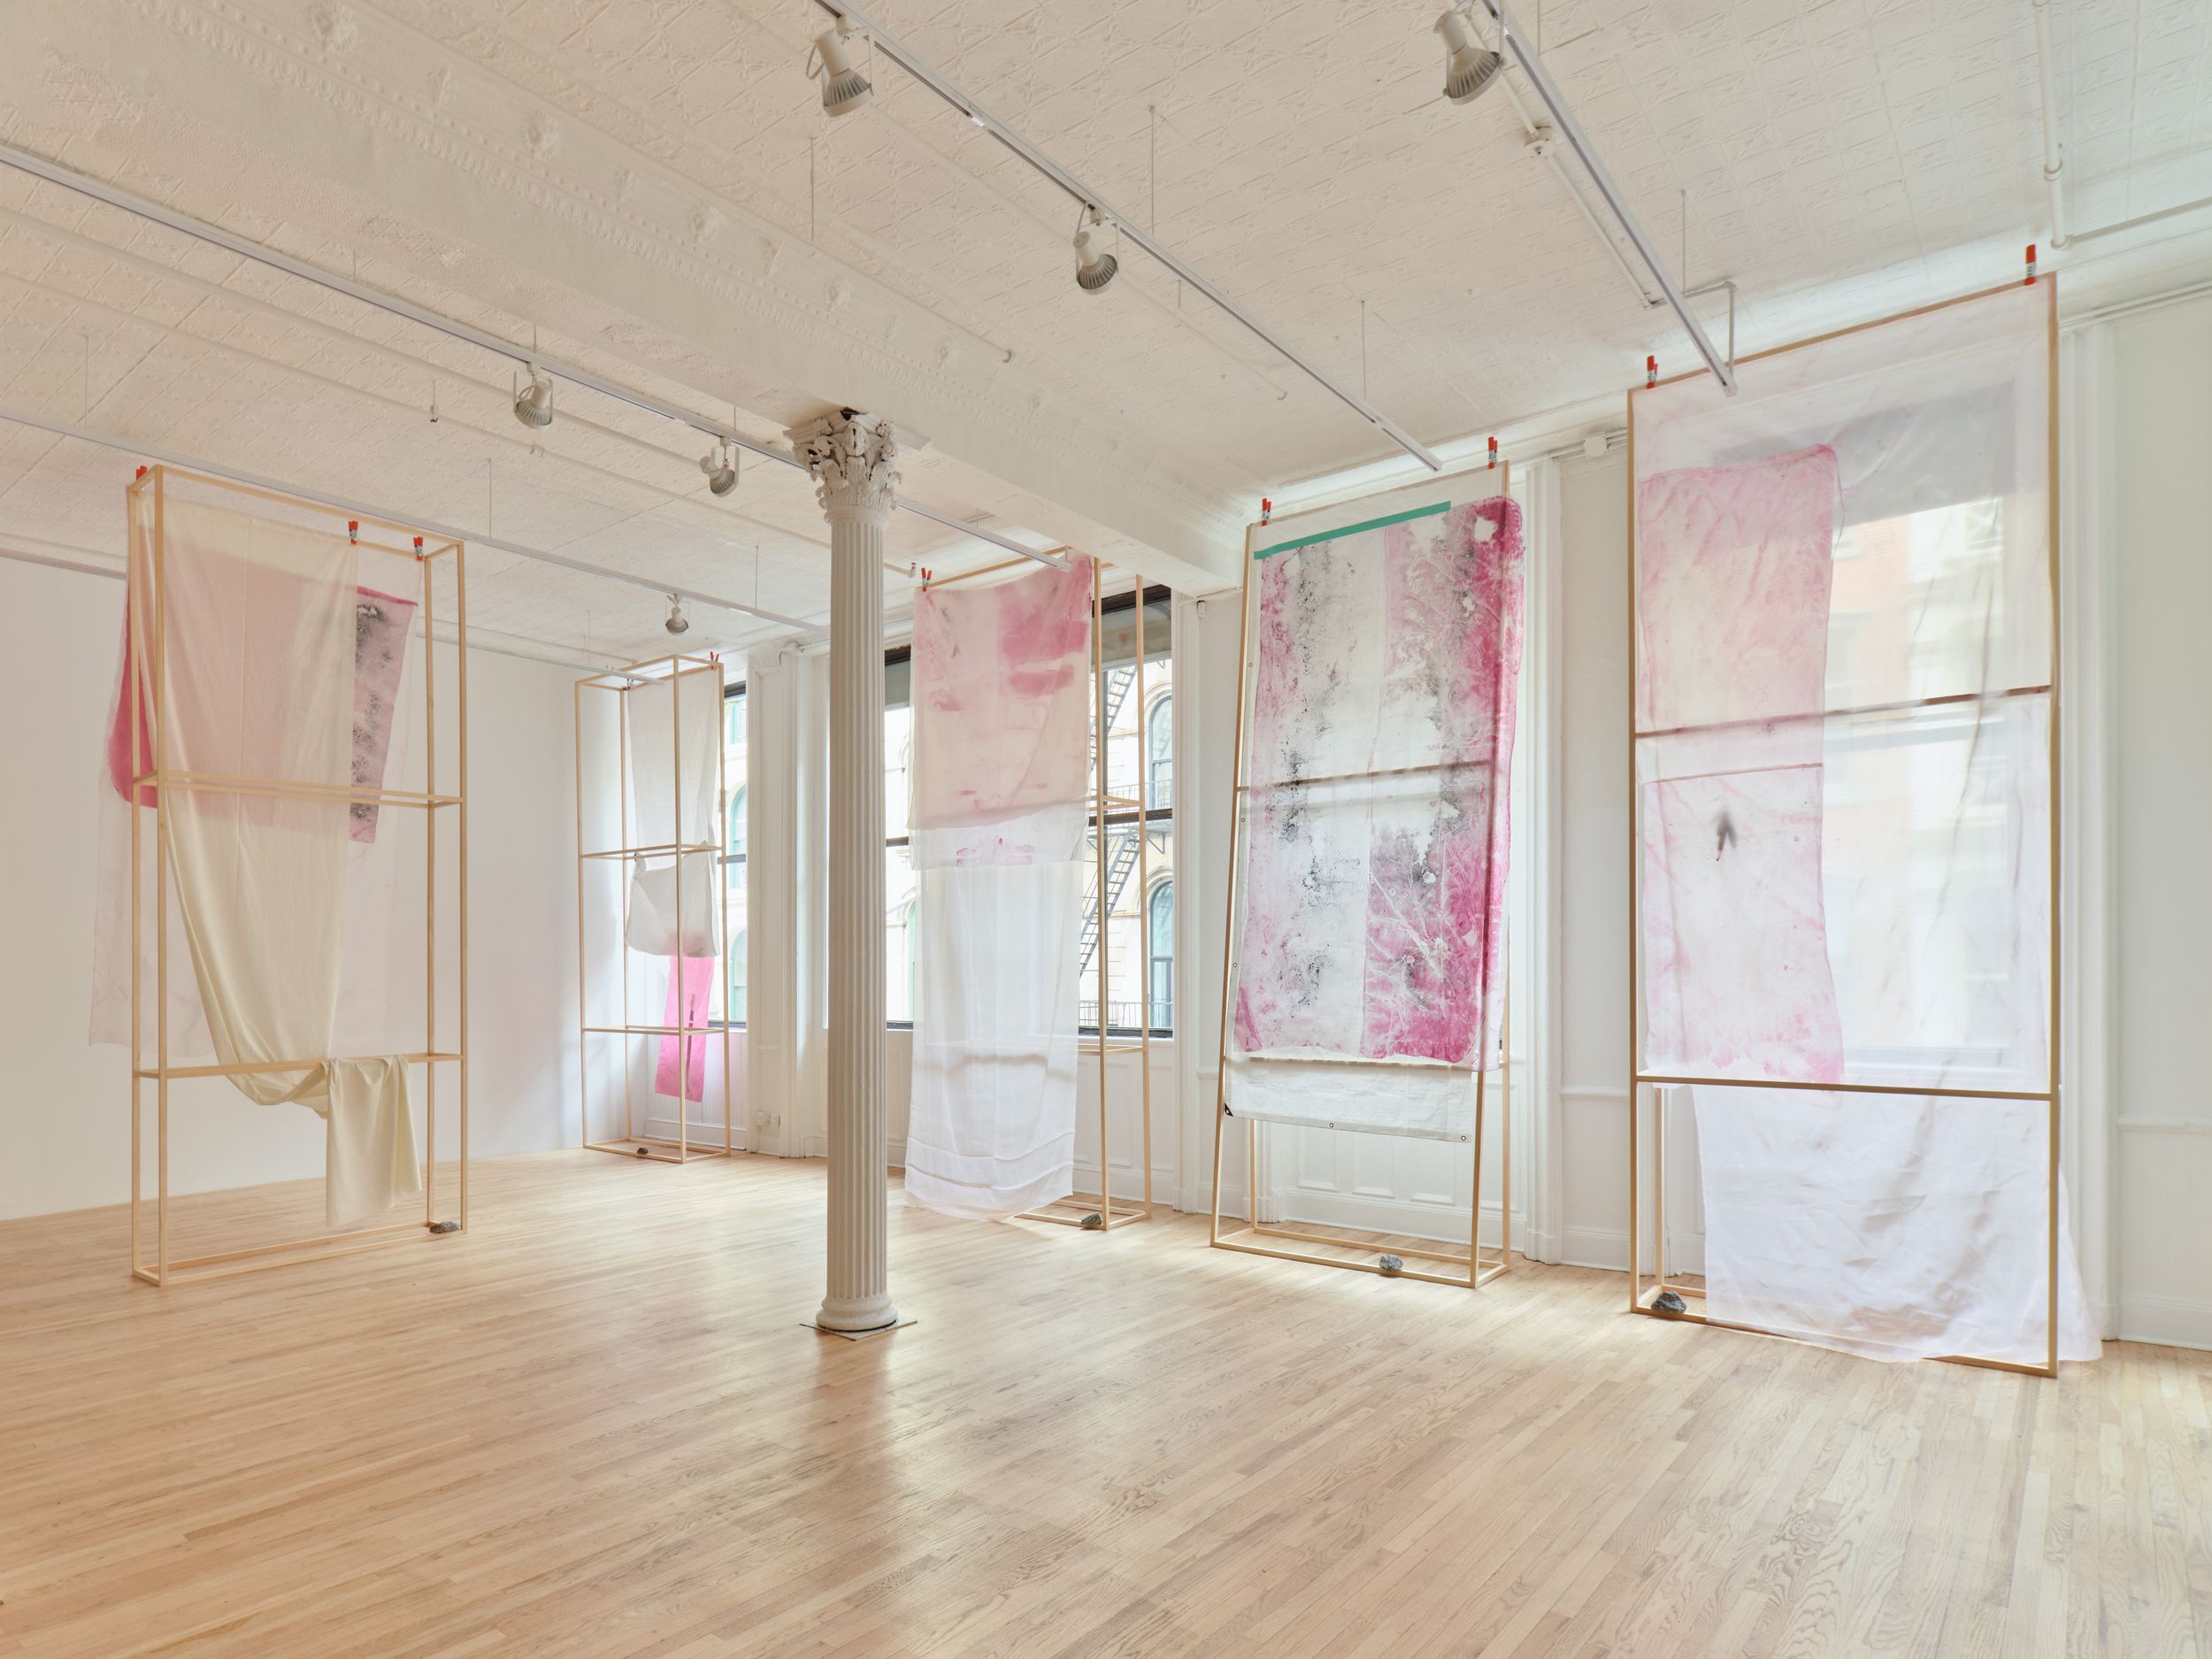 Installation view of dressing